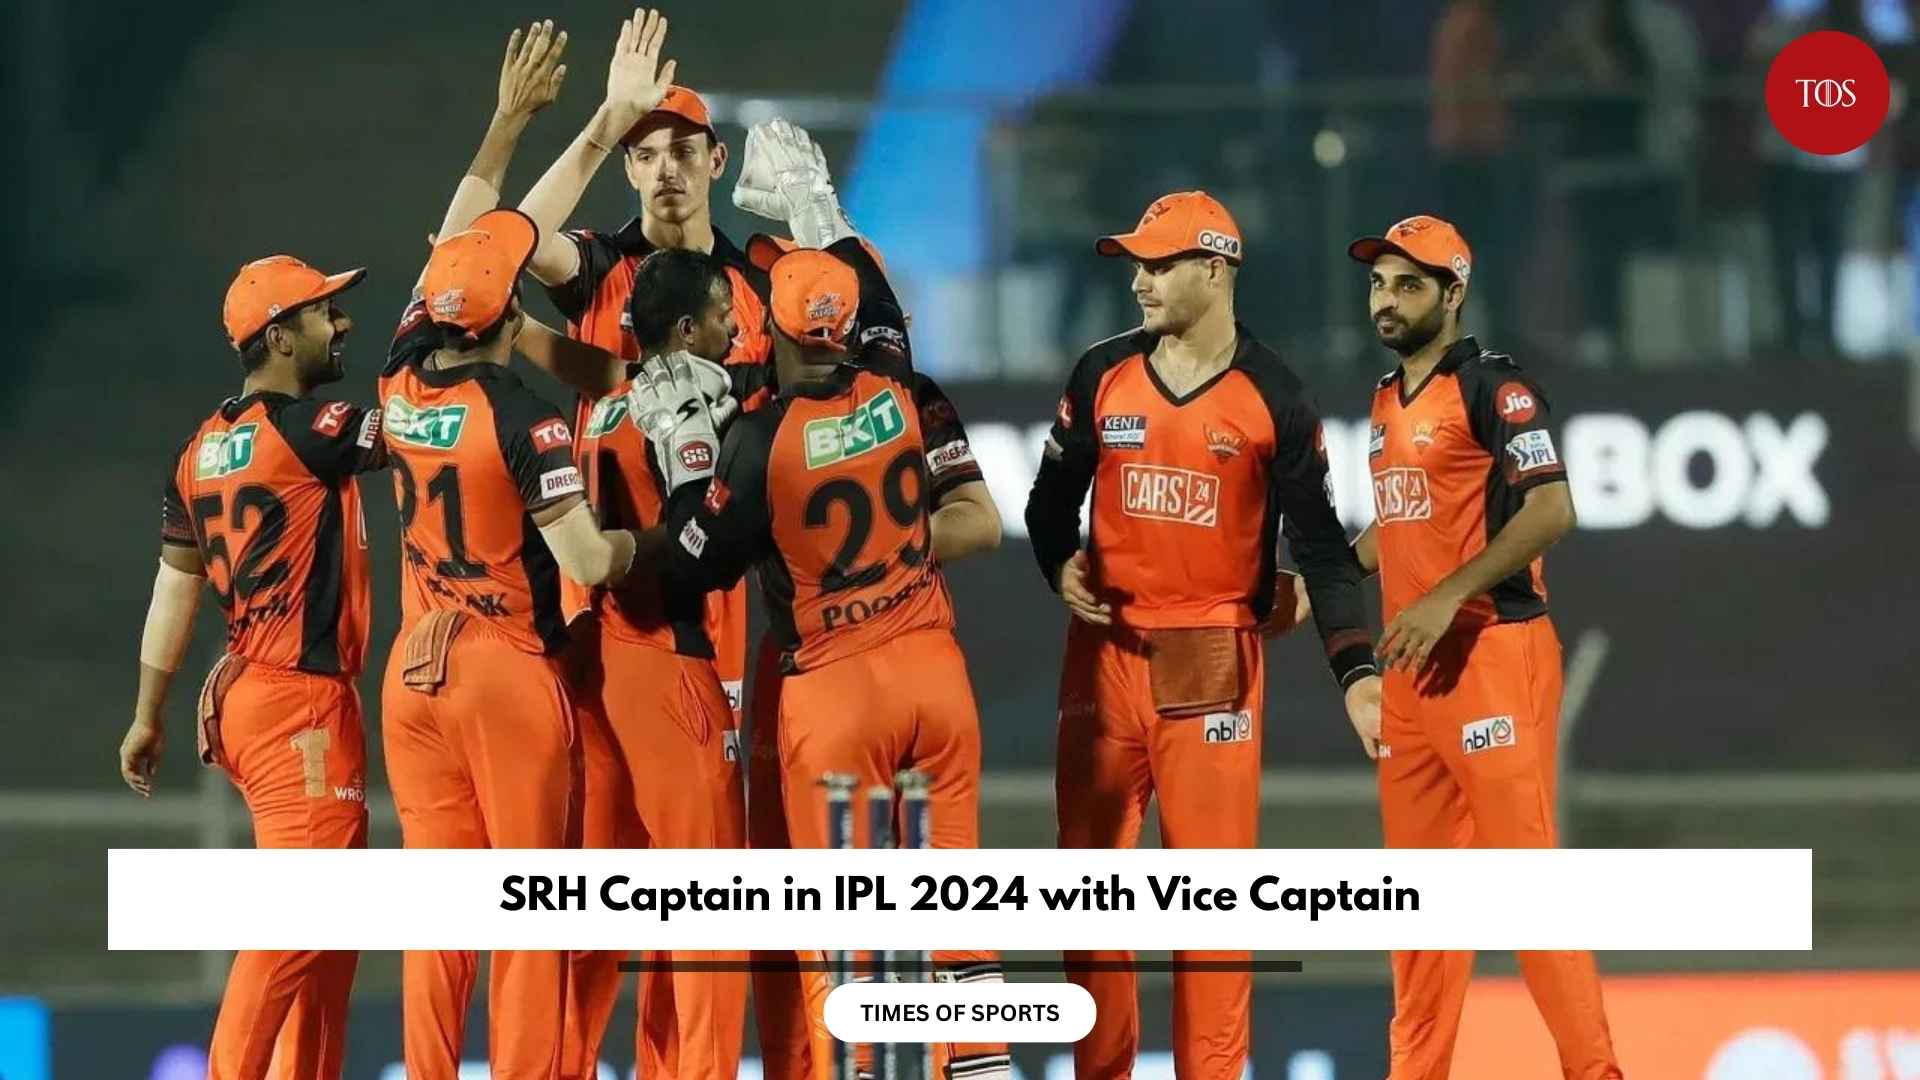 SRH Captain in IPL 2024 with Vice Captain Details